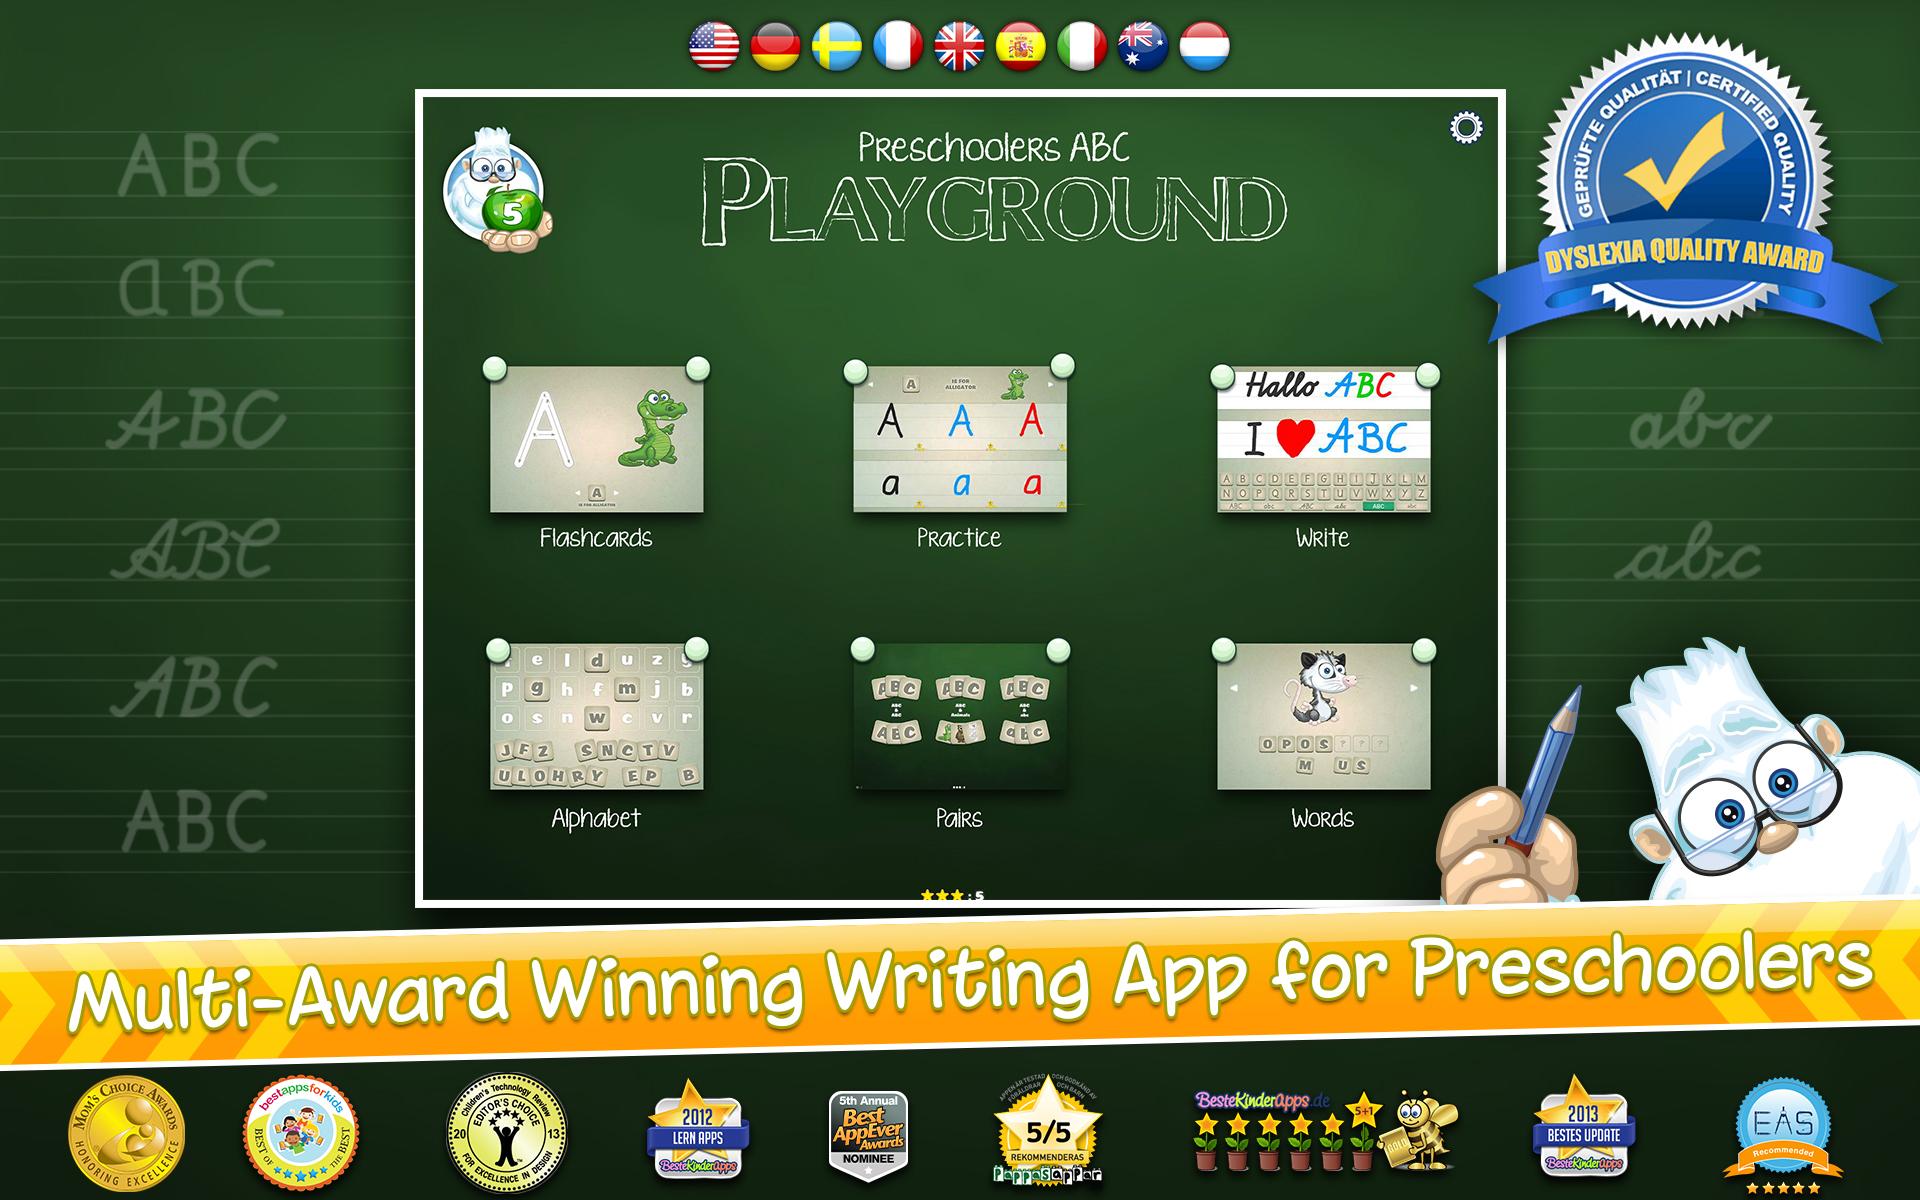 Android application Preschoolers ABC Playground screenshort